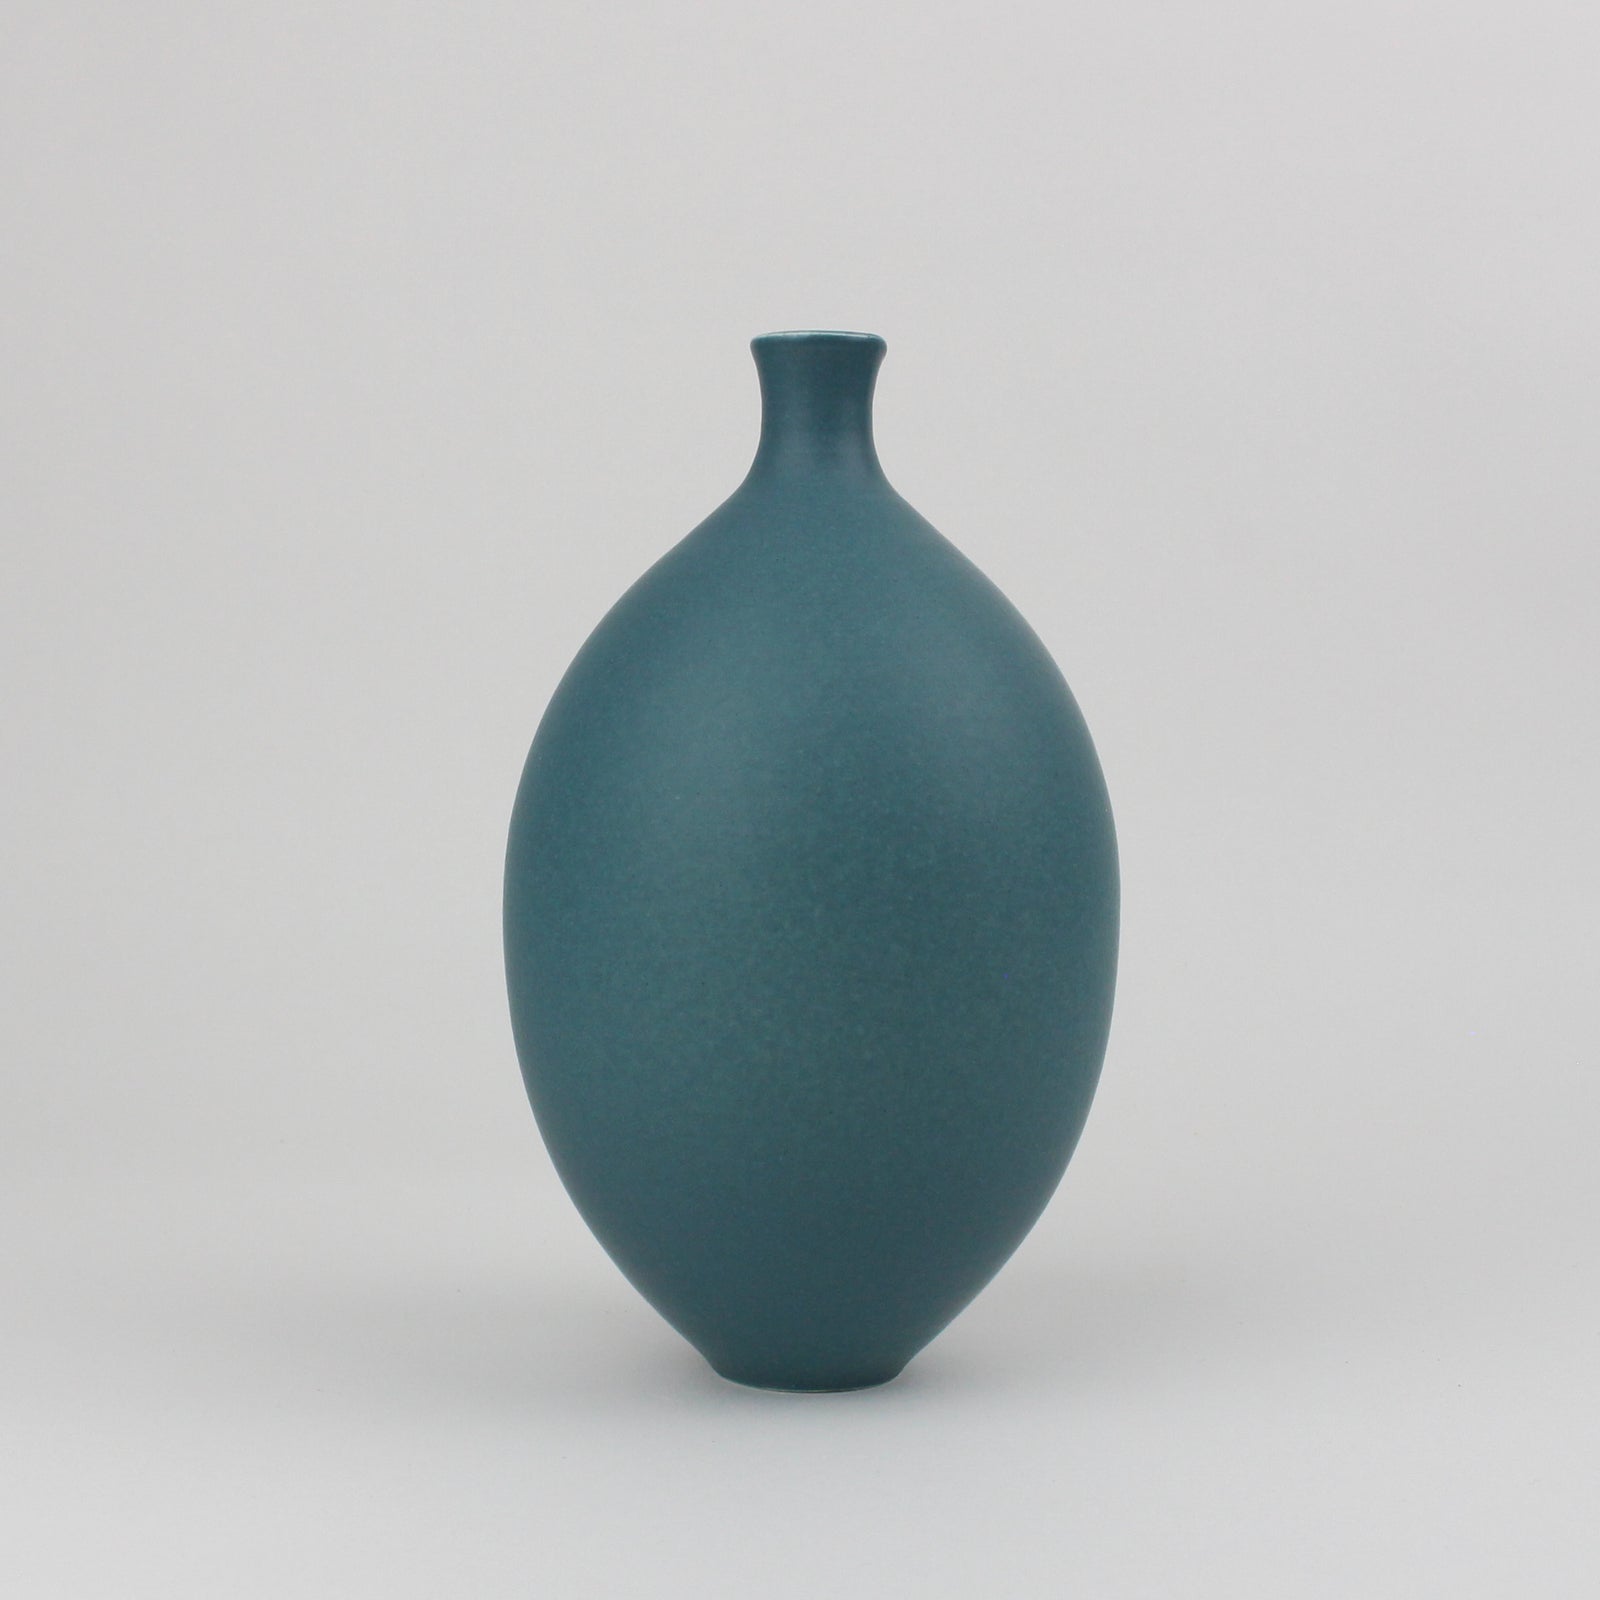 LB178 Teal Oval Vase by Lucy Burley, available at Padstow Gallery, Cornwall